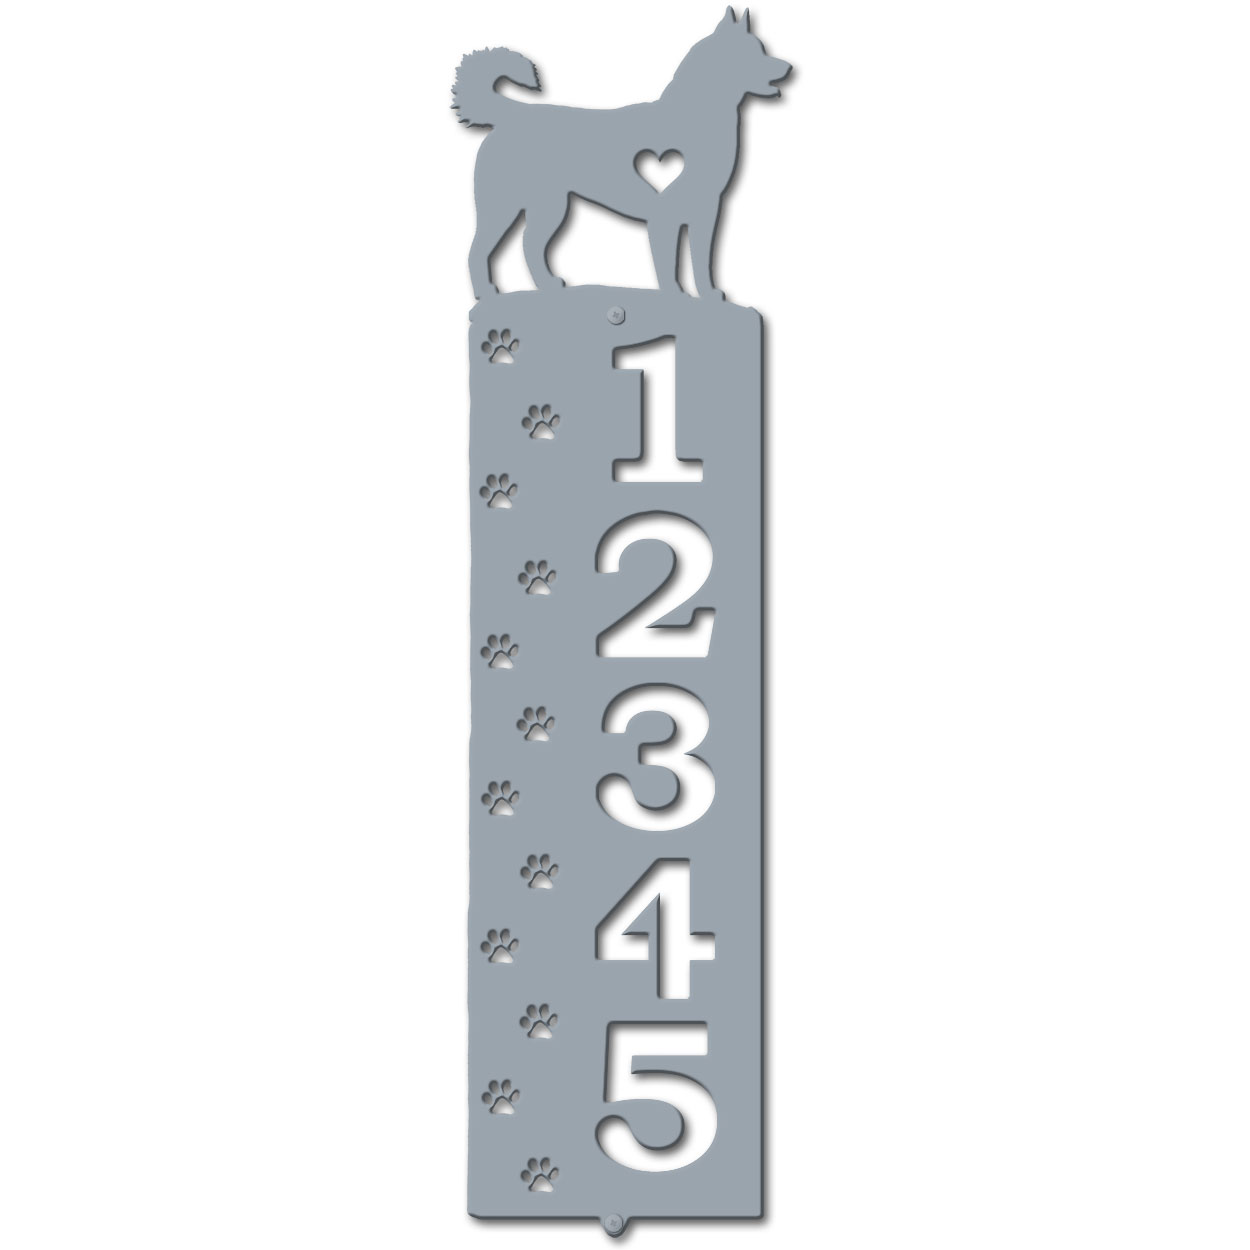 636245 - Husky Cut-Outs Five Digit Address Number Plaque - Choose Size and Color